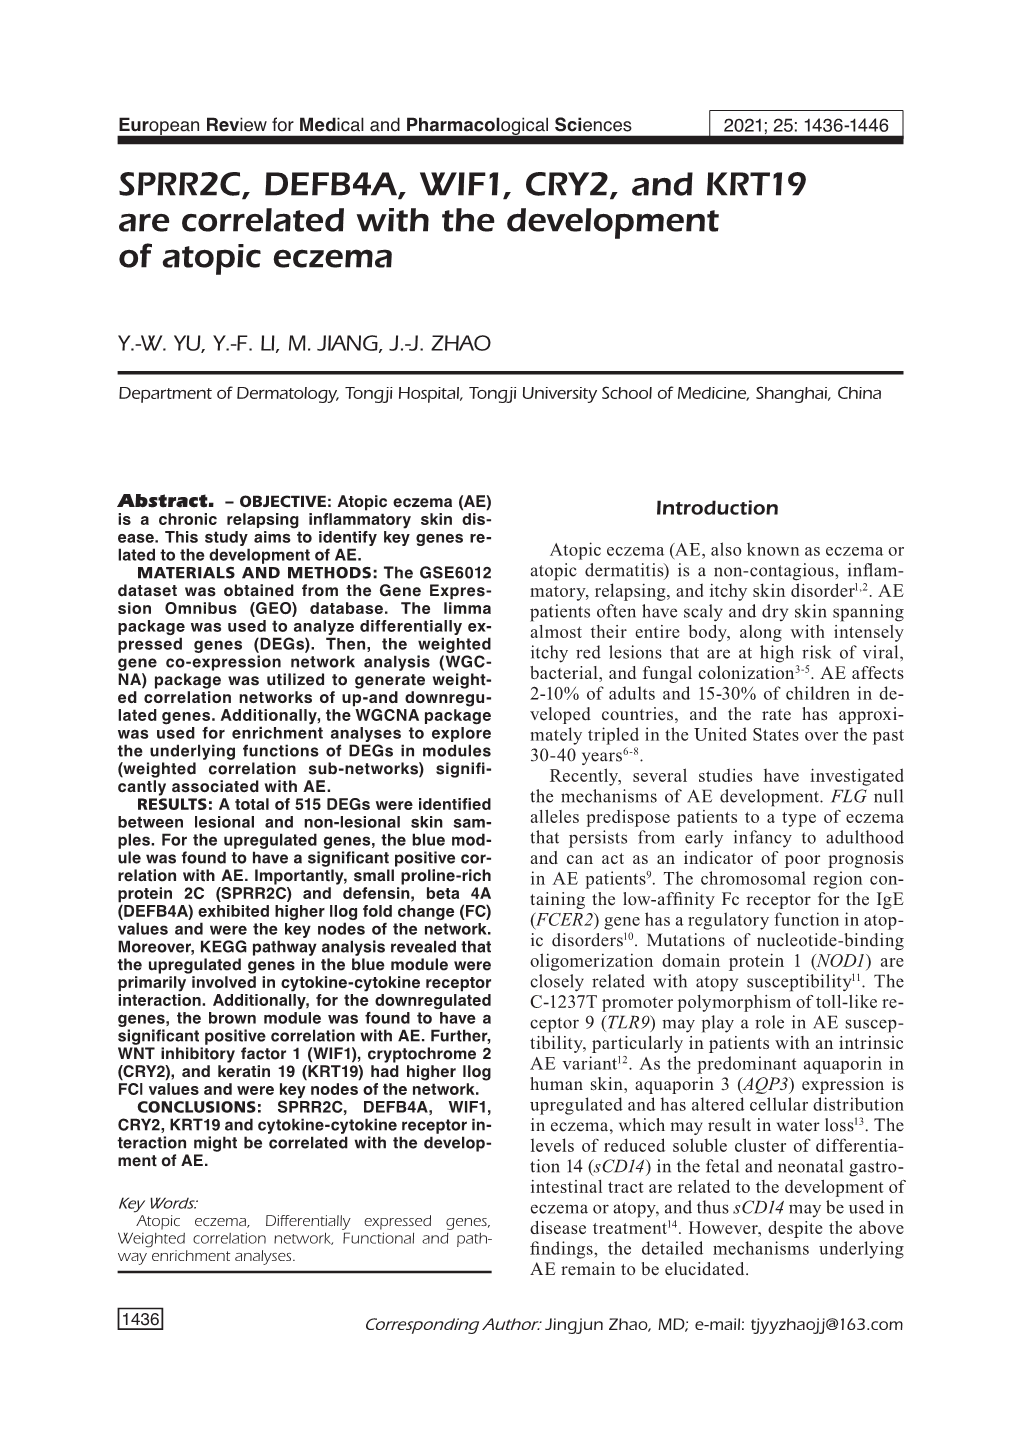 SPRR2C, DEFB4A, WIF1, CRY2, and KRT19 Are Correlated with the Development of Atopic Eczema